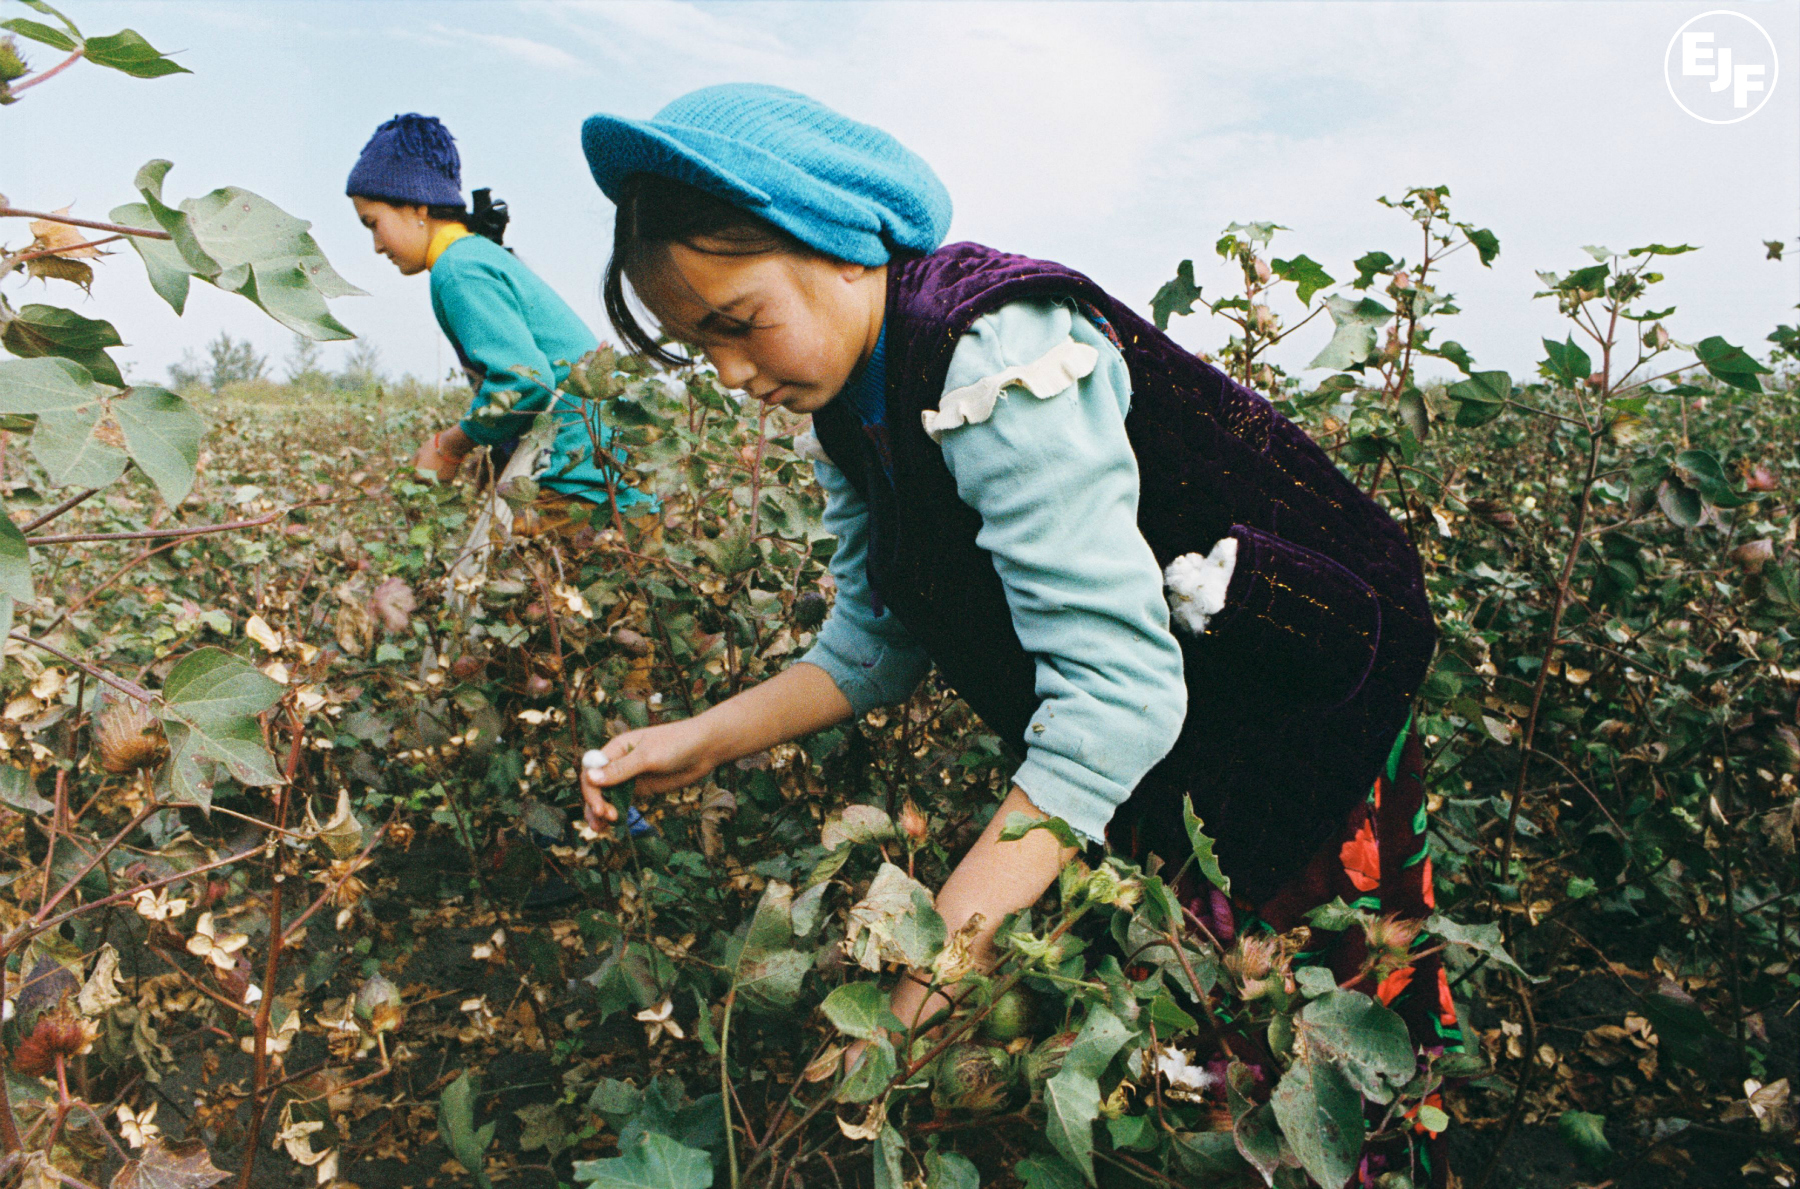 Tesco takes a stand against forced labour in Uzbek cotton harvest